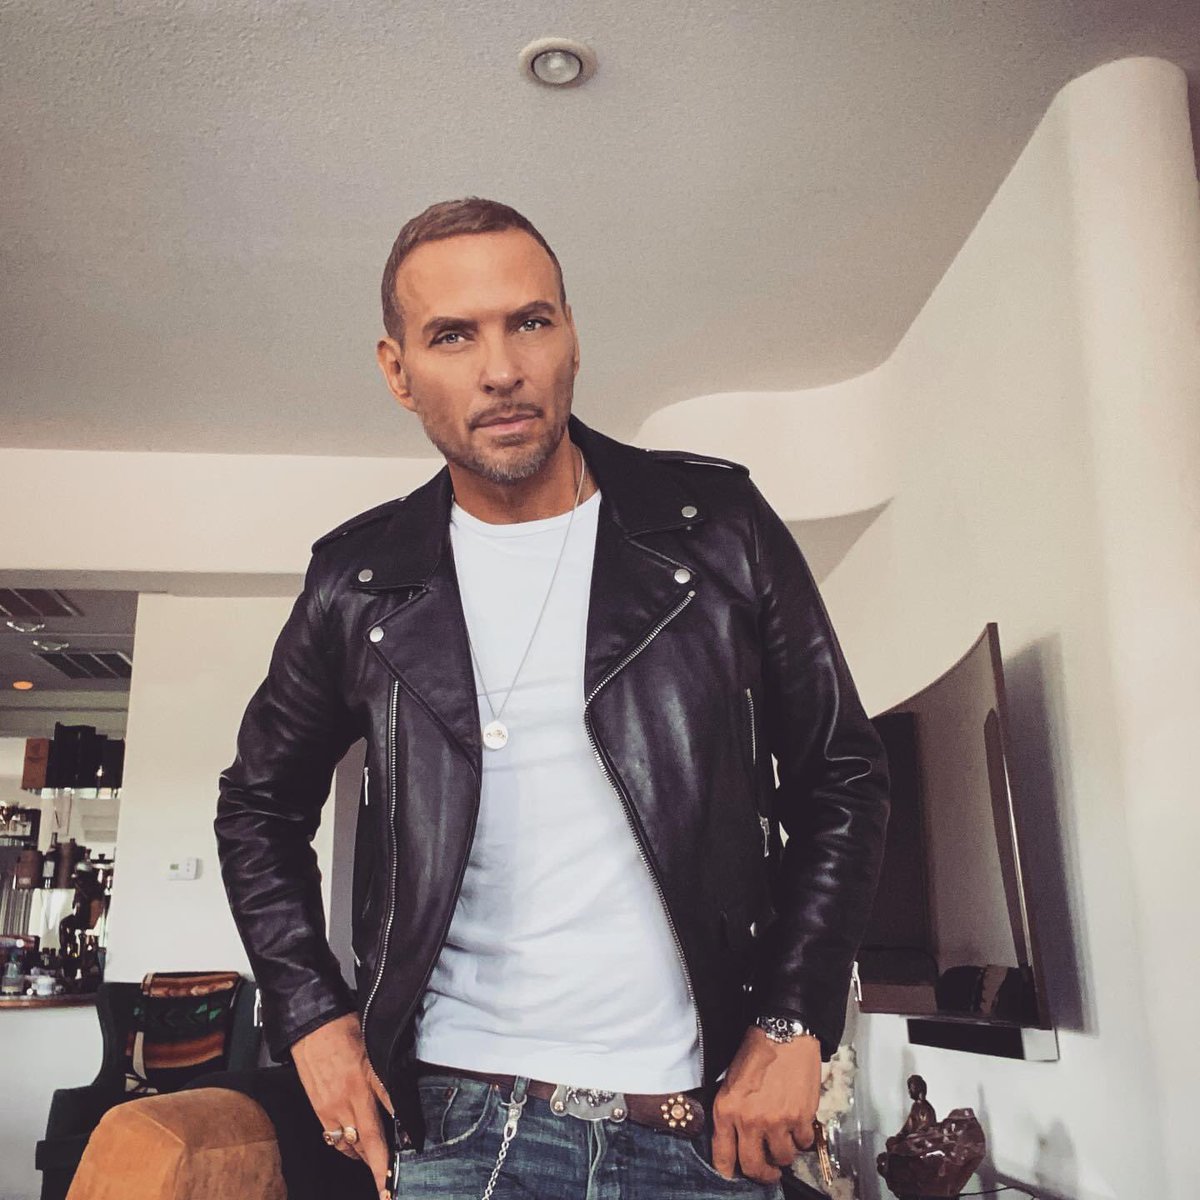 #sundayselfie You look absolutely gorgeous @mattgoss Love your style #gorgeous #handsome #stylish #sendinglove❤️❤️